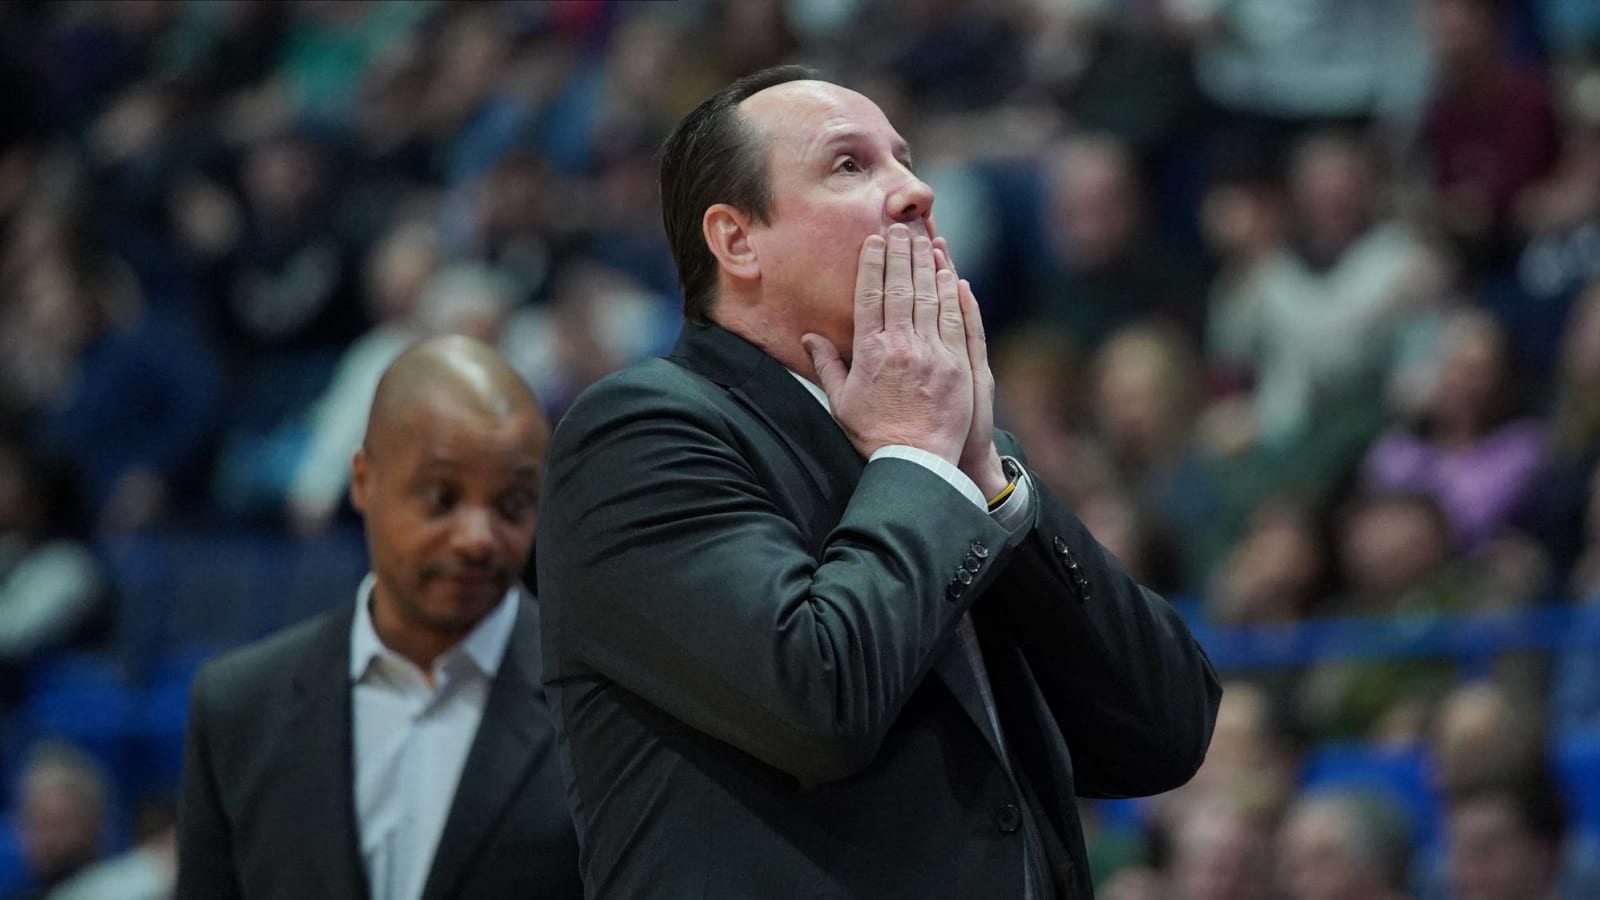 Gregg Marshall addresses allegations of misconduct